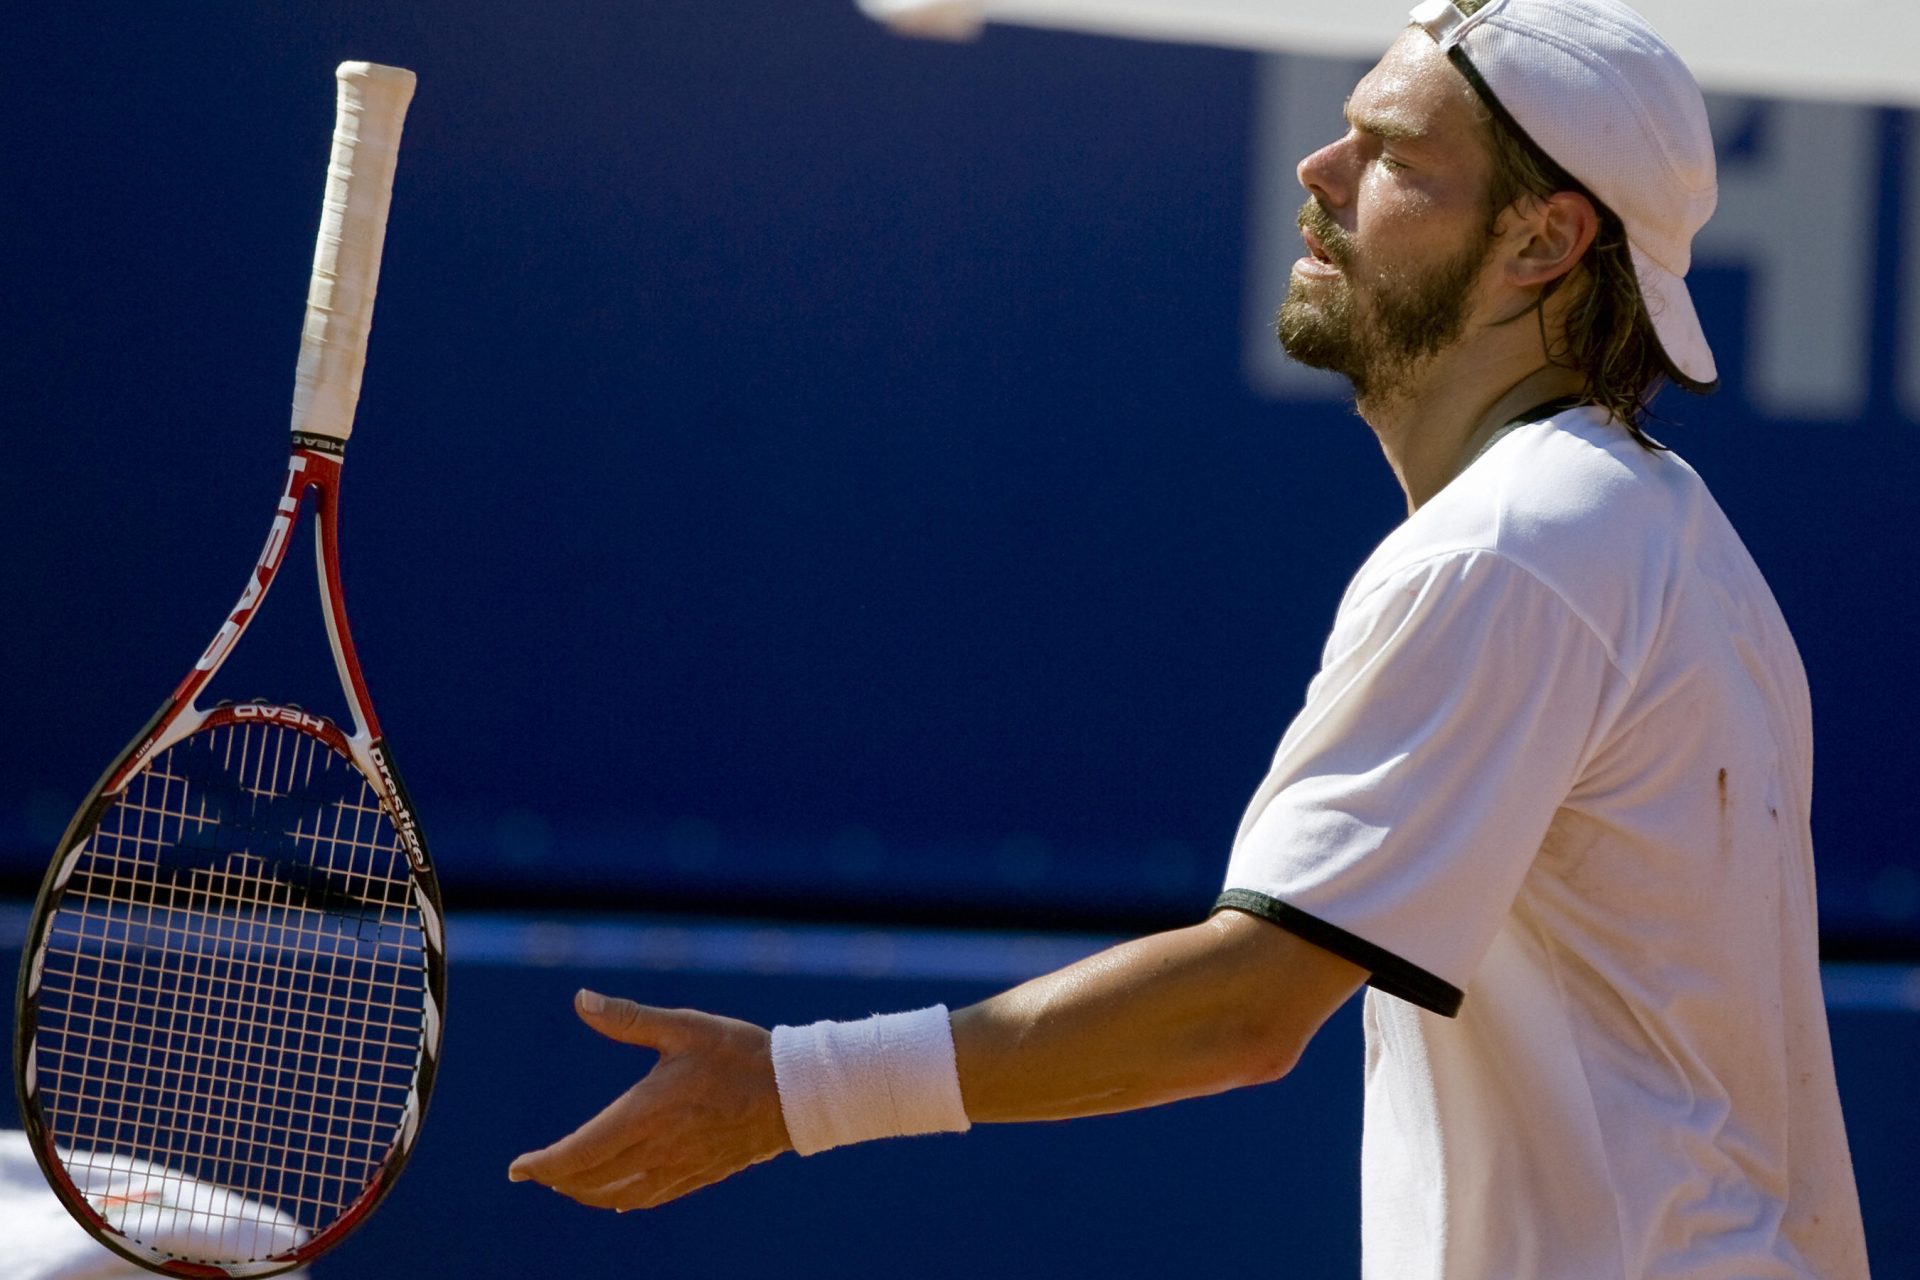 The scandalous story of Daniel Köllerer, the most hated tennis player